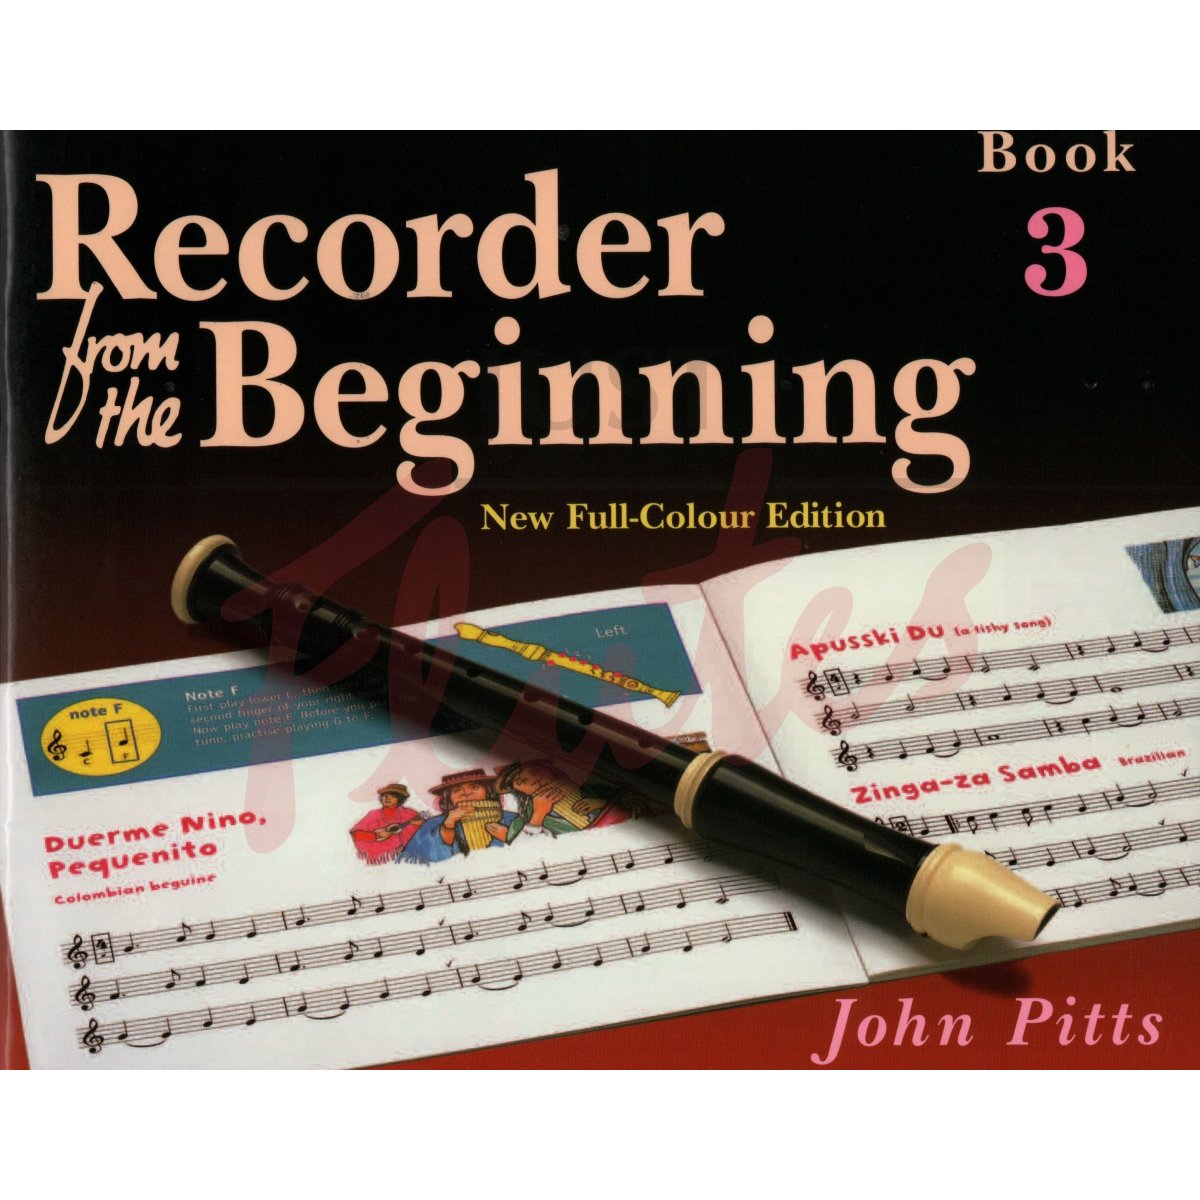 Recorder from the Beginning Book 3 - New Full-Colour Edition